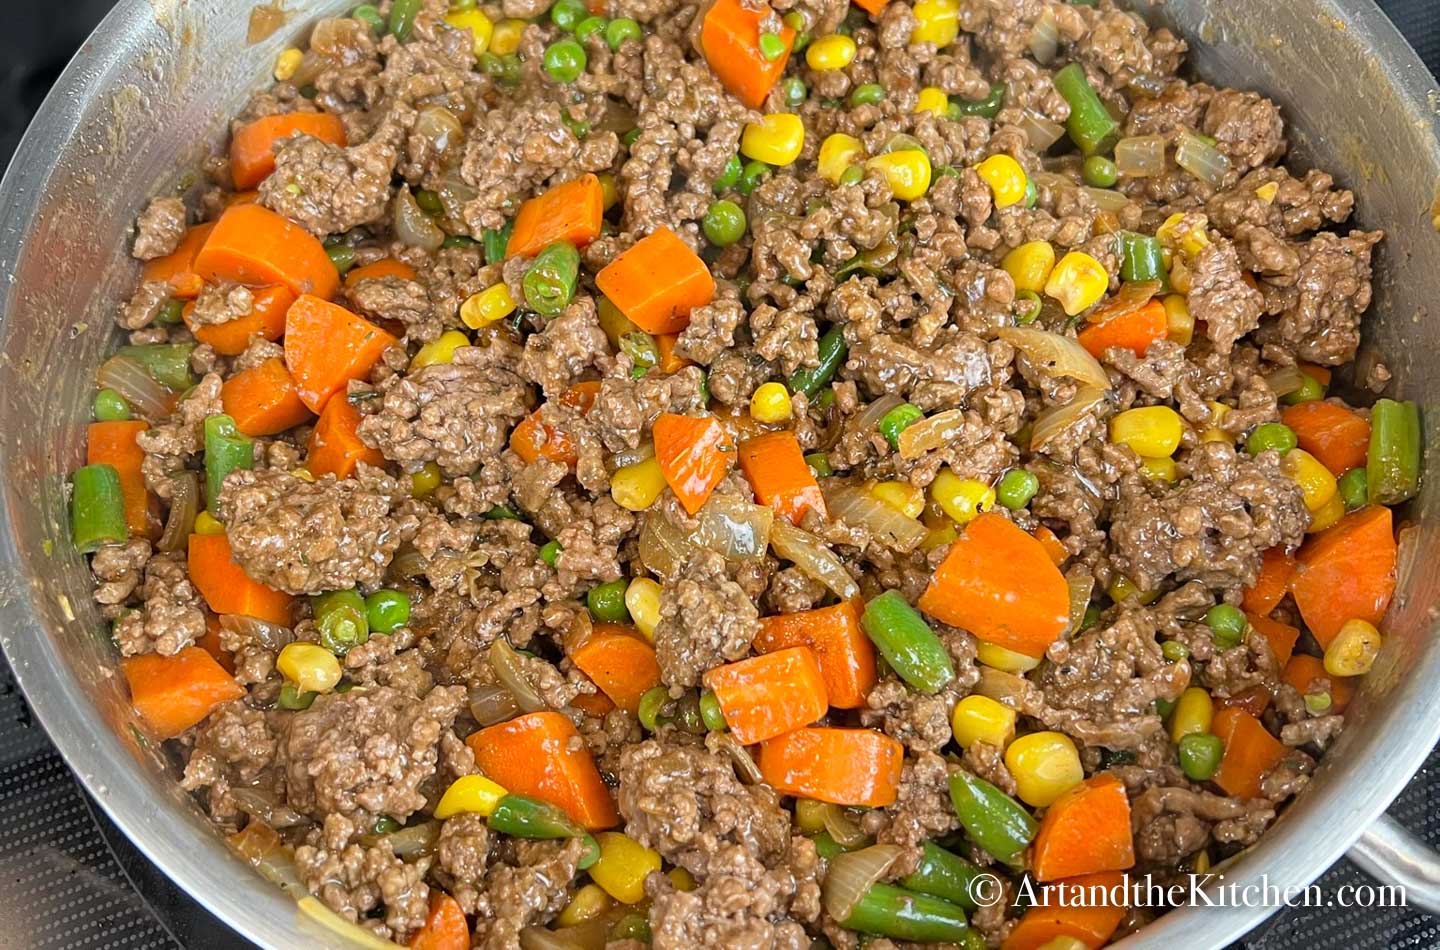 Stainless steel skillet filled with cooked ground beef and vegetables in gravy.